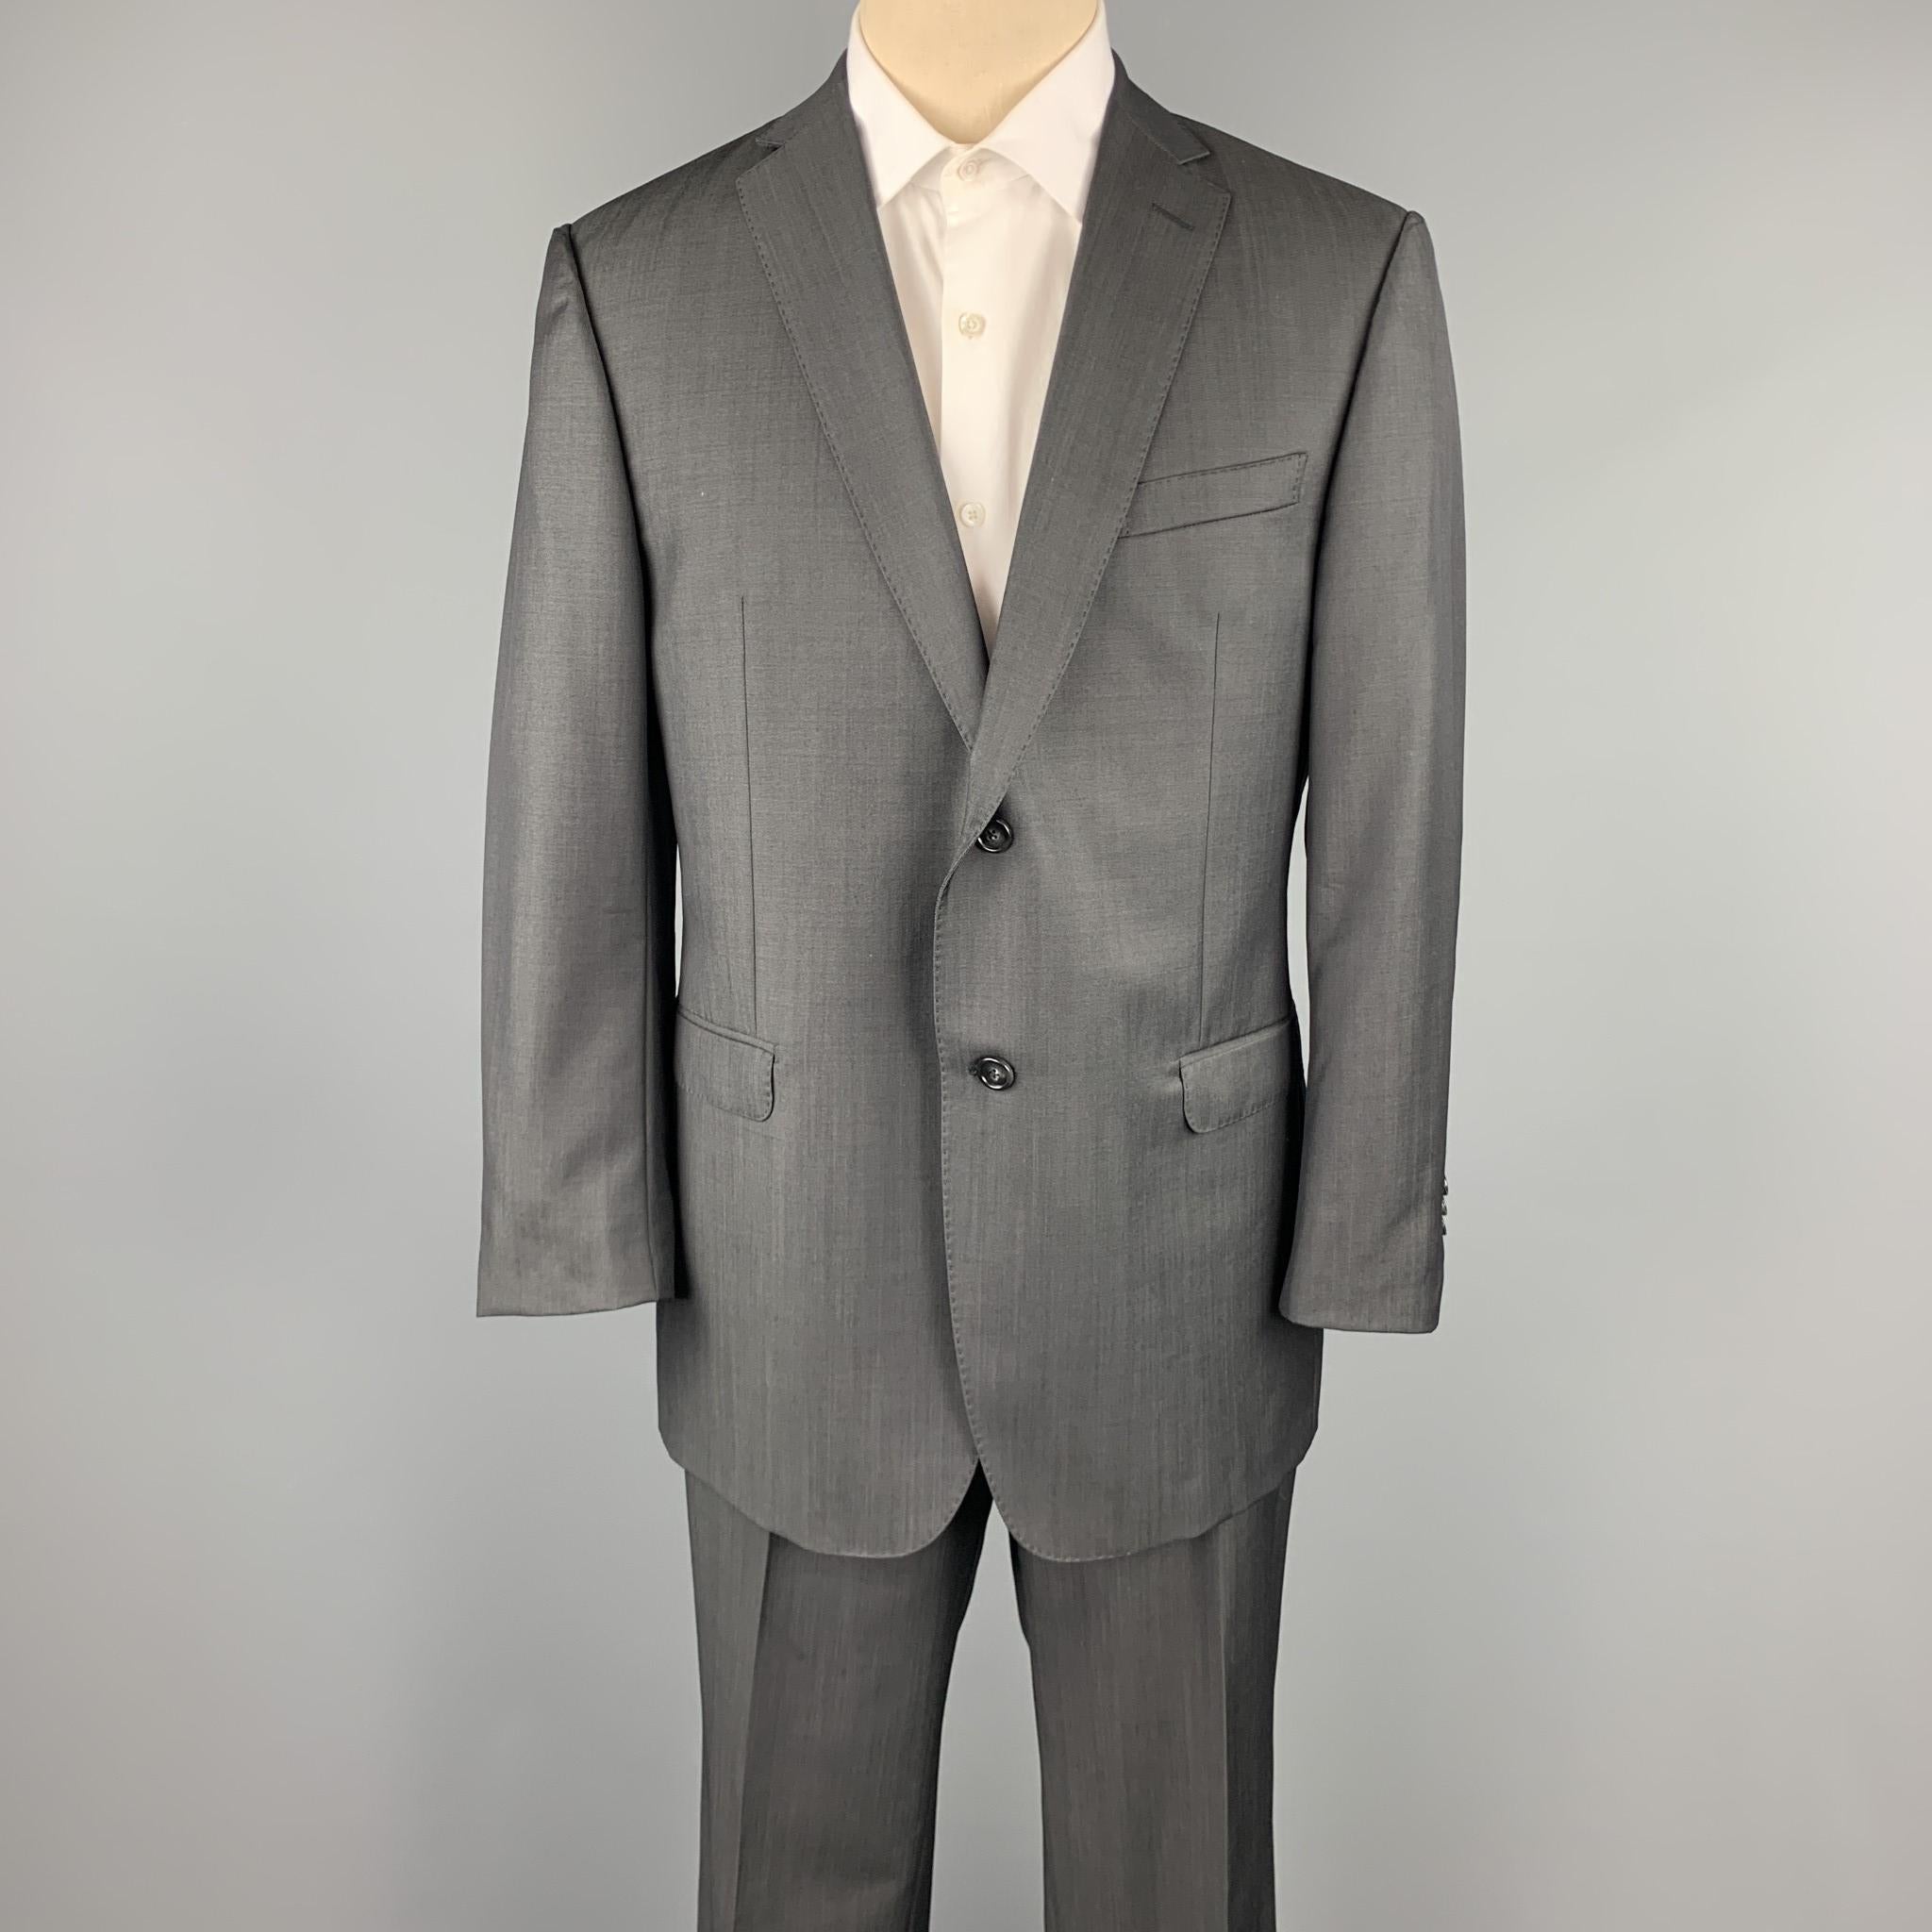 Z ZEGNA suit comes in a charcoal wool / mohair and includes a single breasted, two button sport coat with a notch lapel and matching flat front trousers. 

Excellent Pre-Owned Condition.
Marked: 54 R

Measurements:

-Jacket
Shoulder: 18 in. 
Chest: